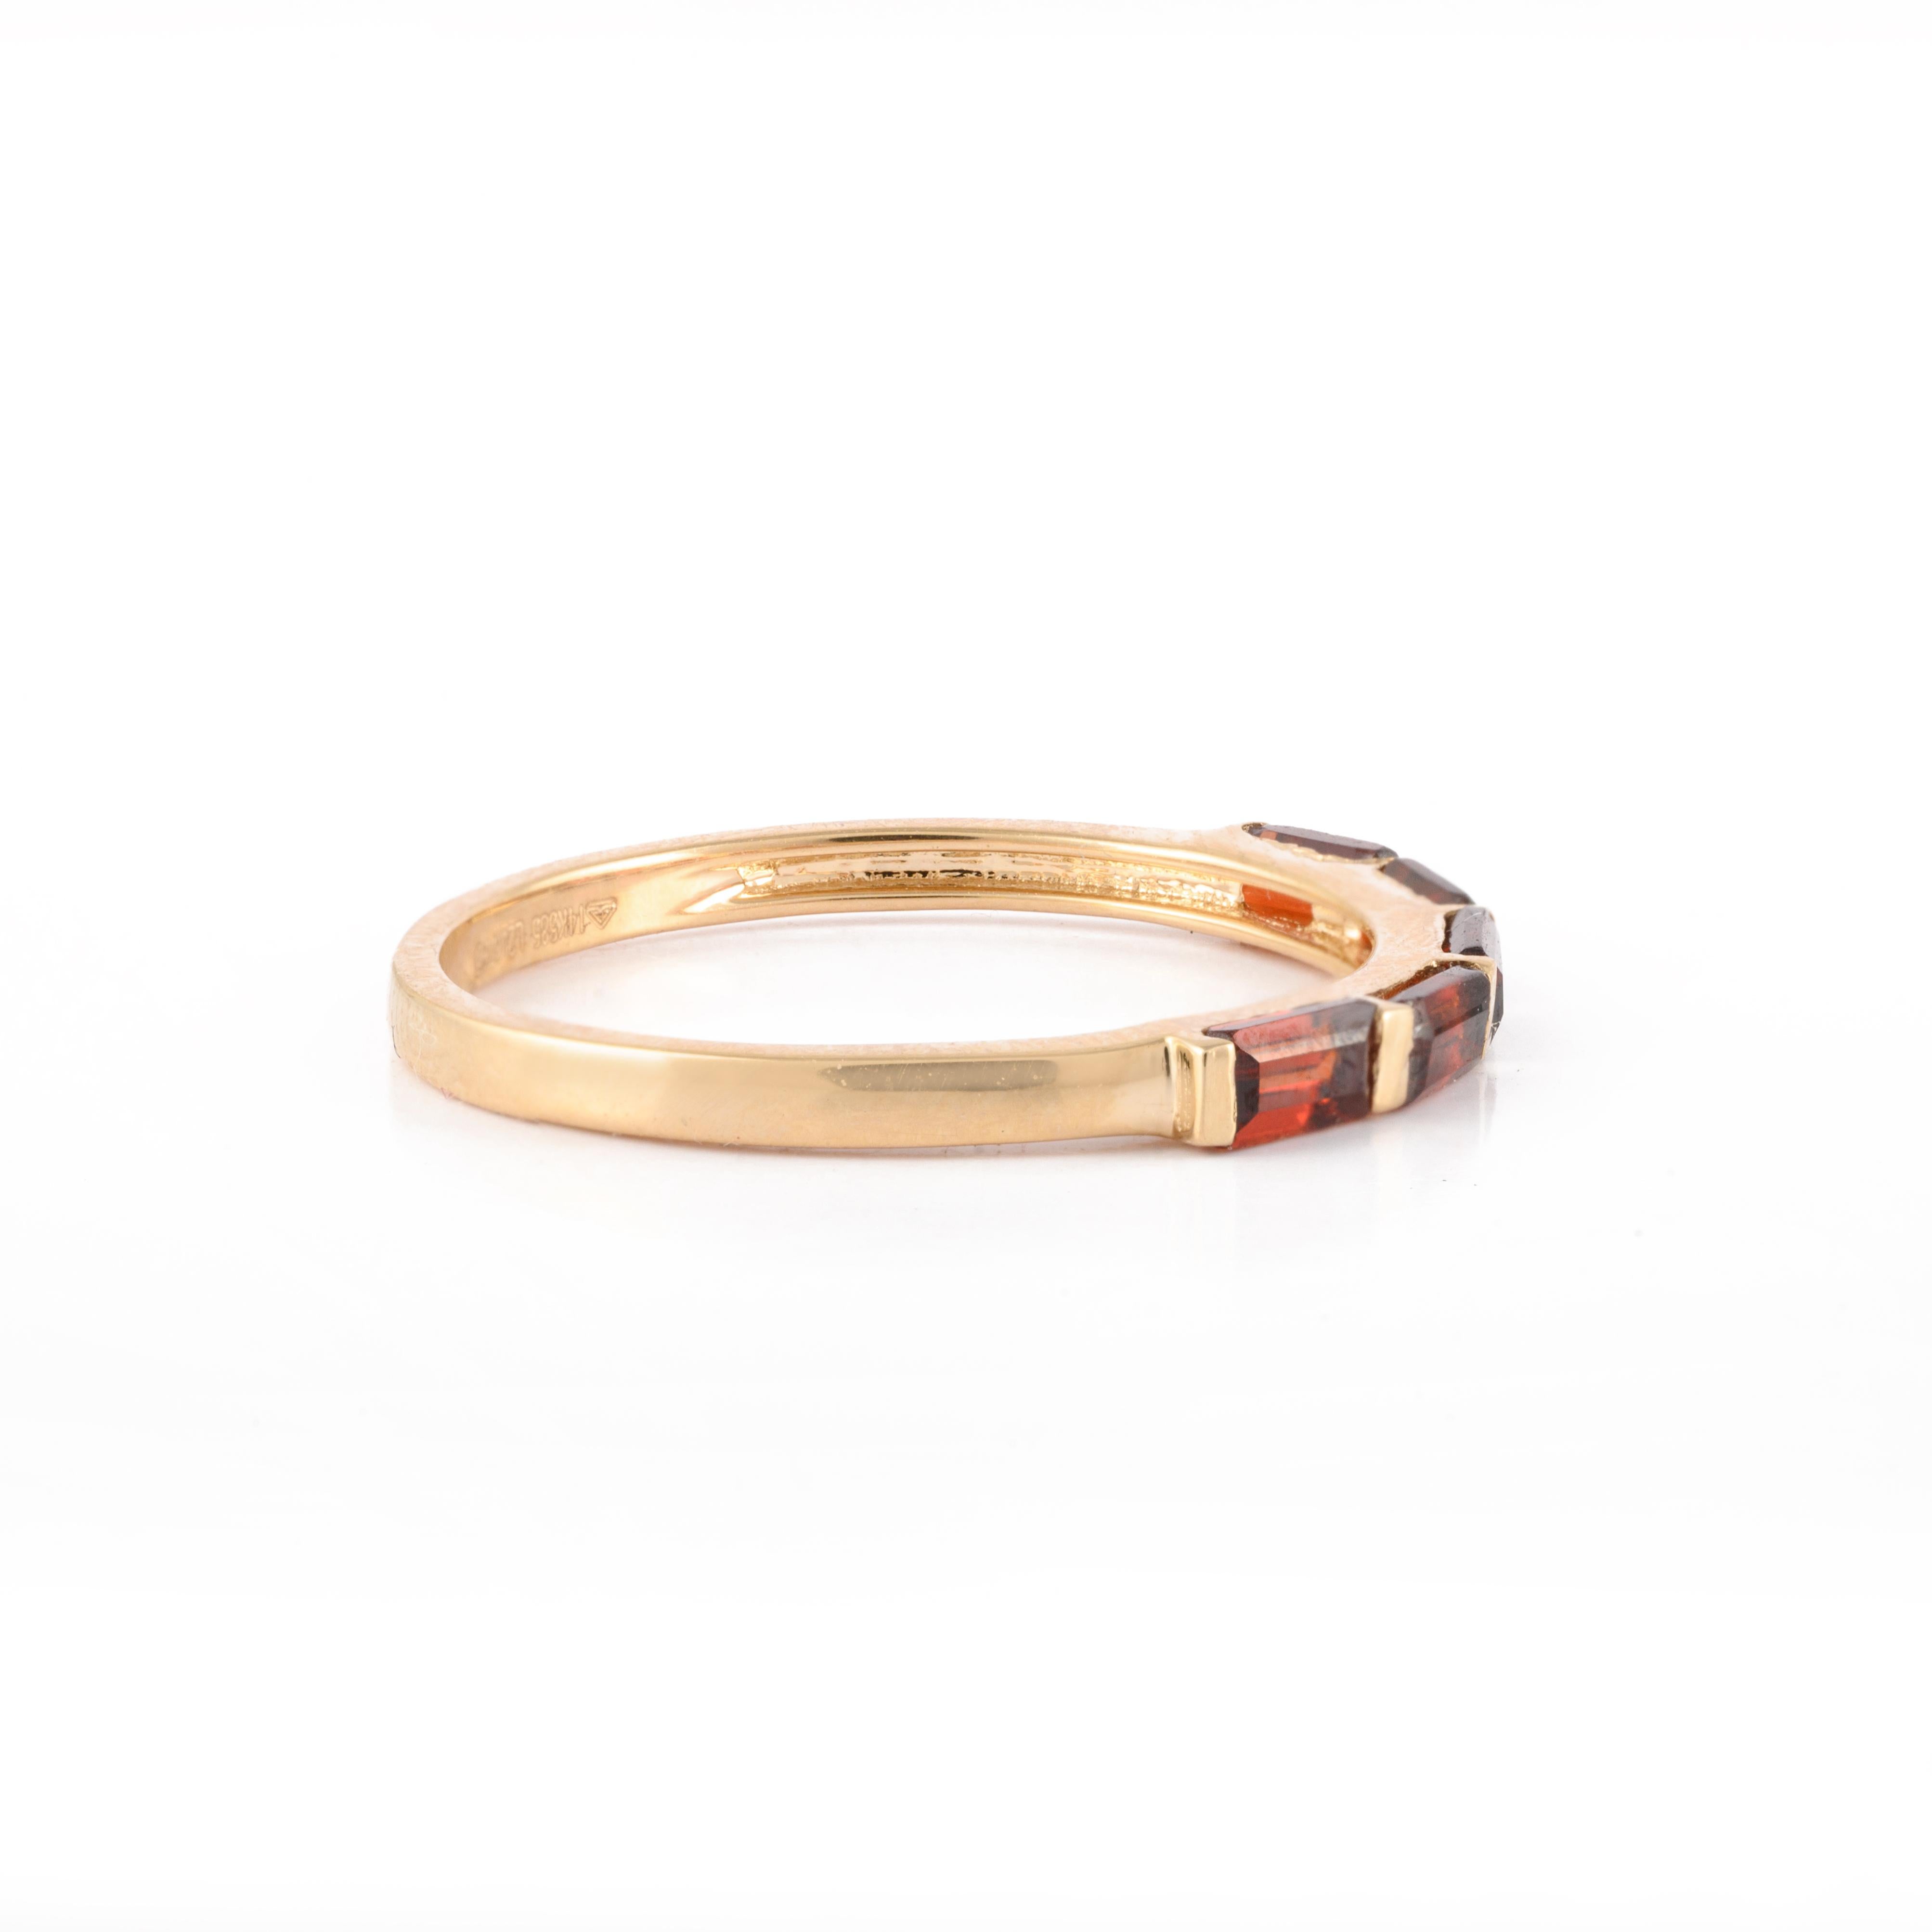 For Sale:  Natural Garnet Half Stackable Band Ring 14 Karat Solid Yellow Gold For Her 6